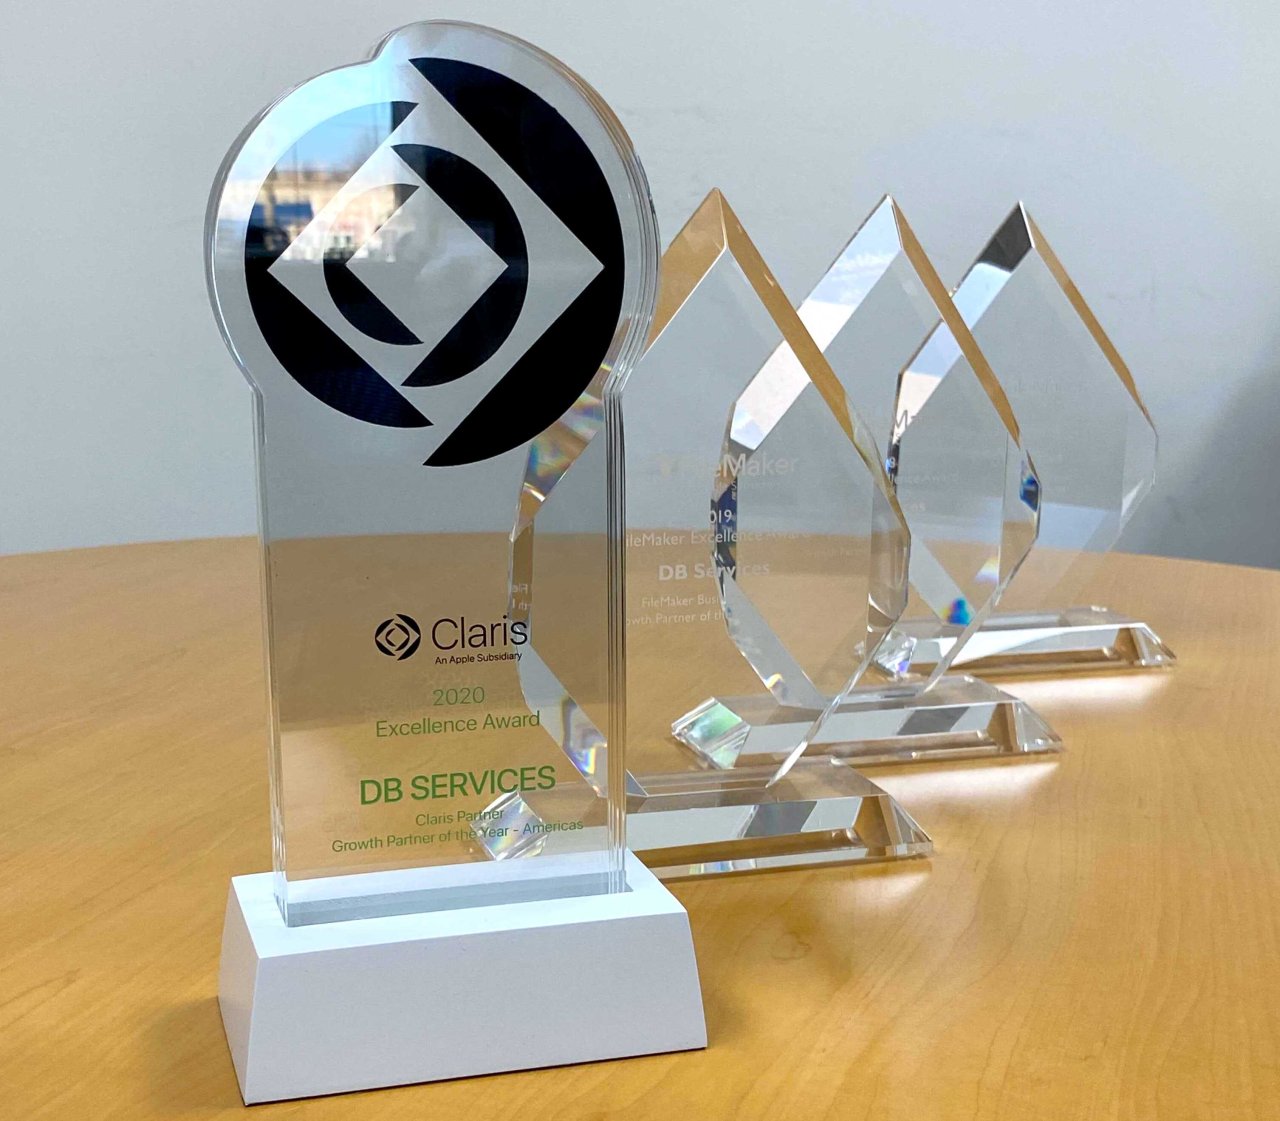 DB Services' collection of 4 Claris partner of the year awards.